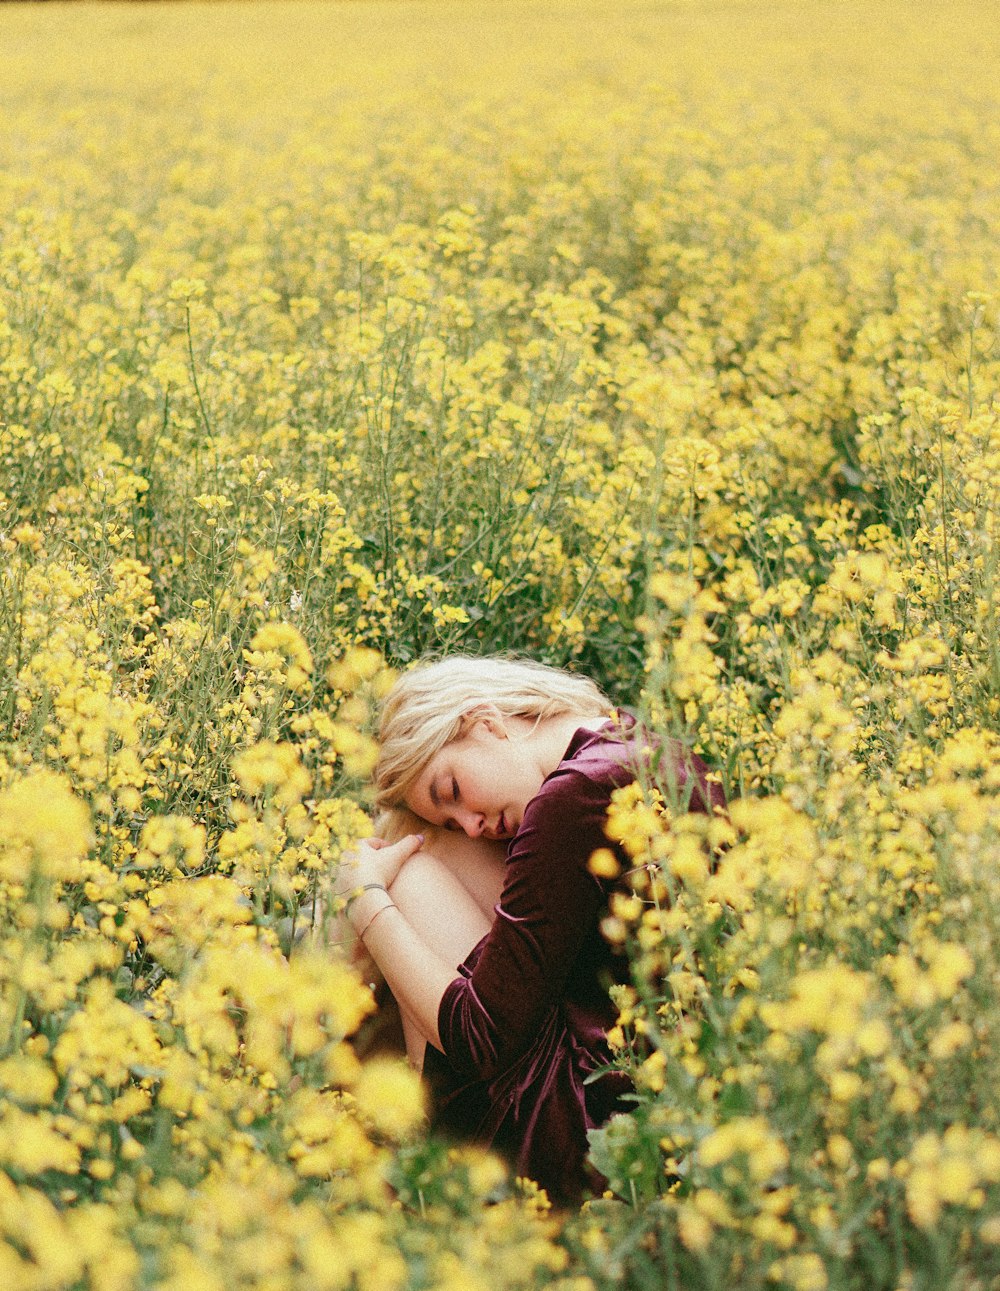 girl in pink shirt on yellow flower field during daytime